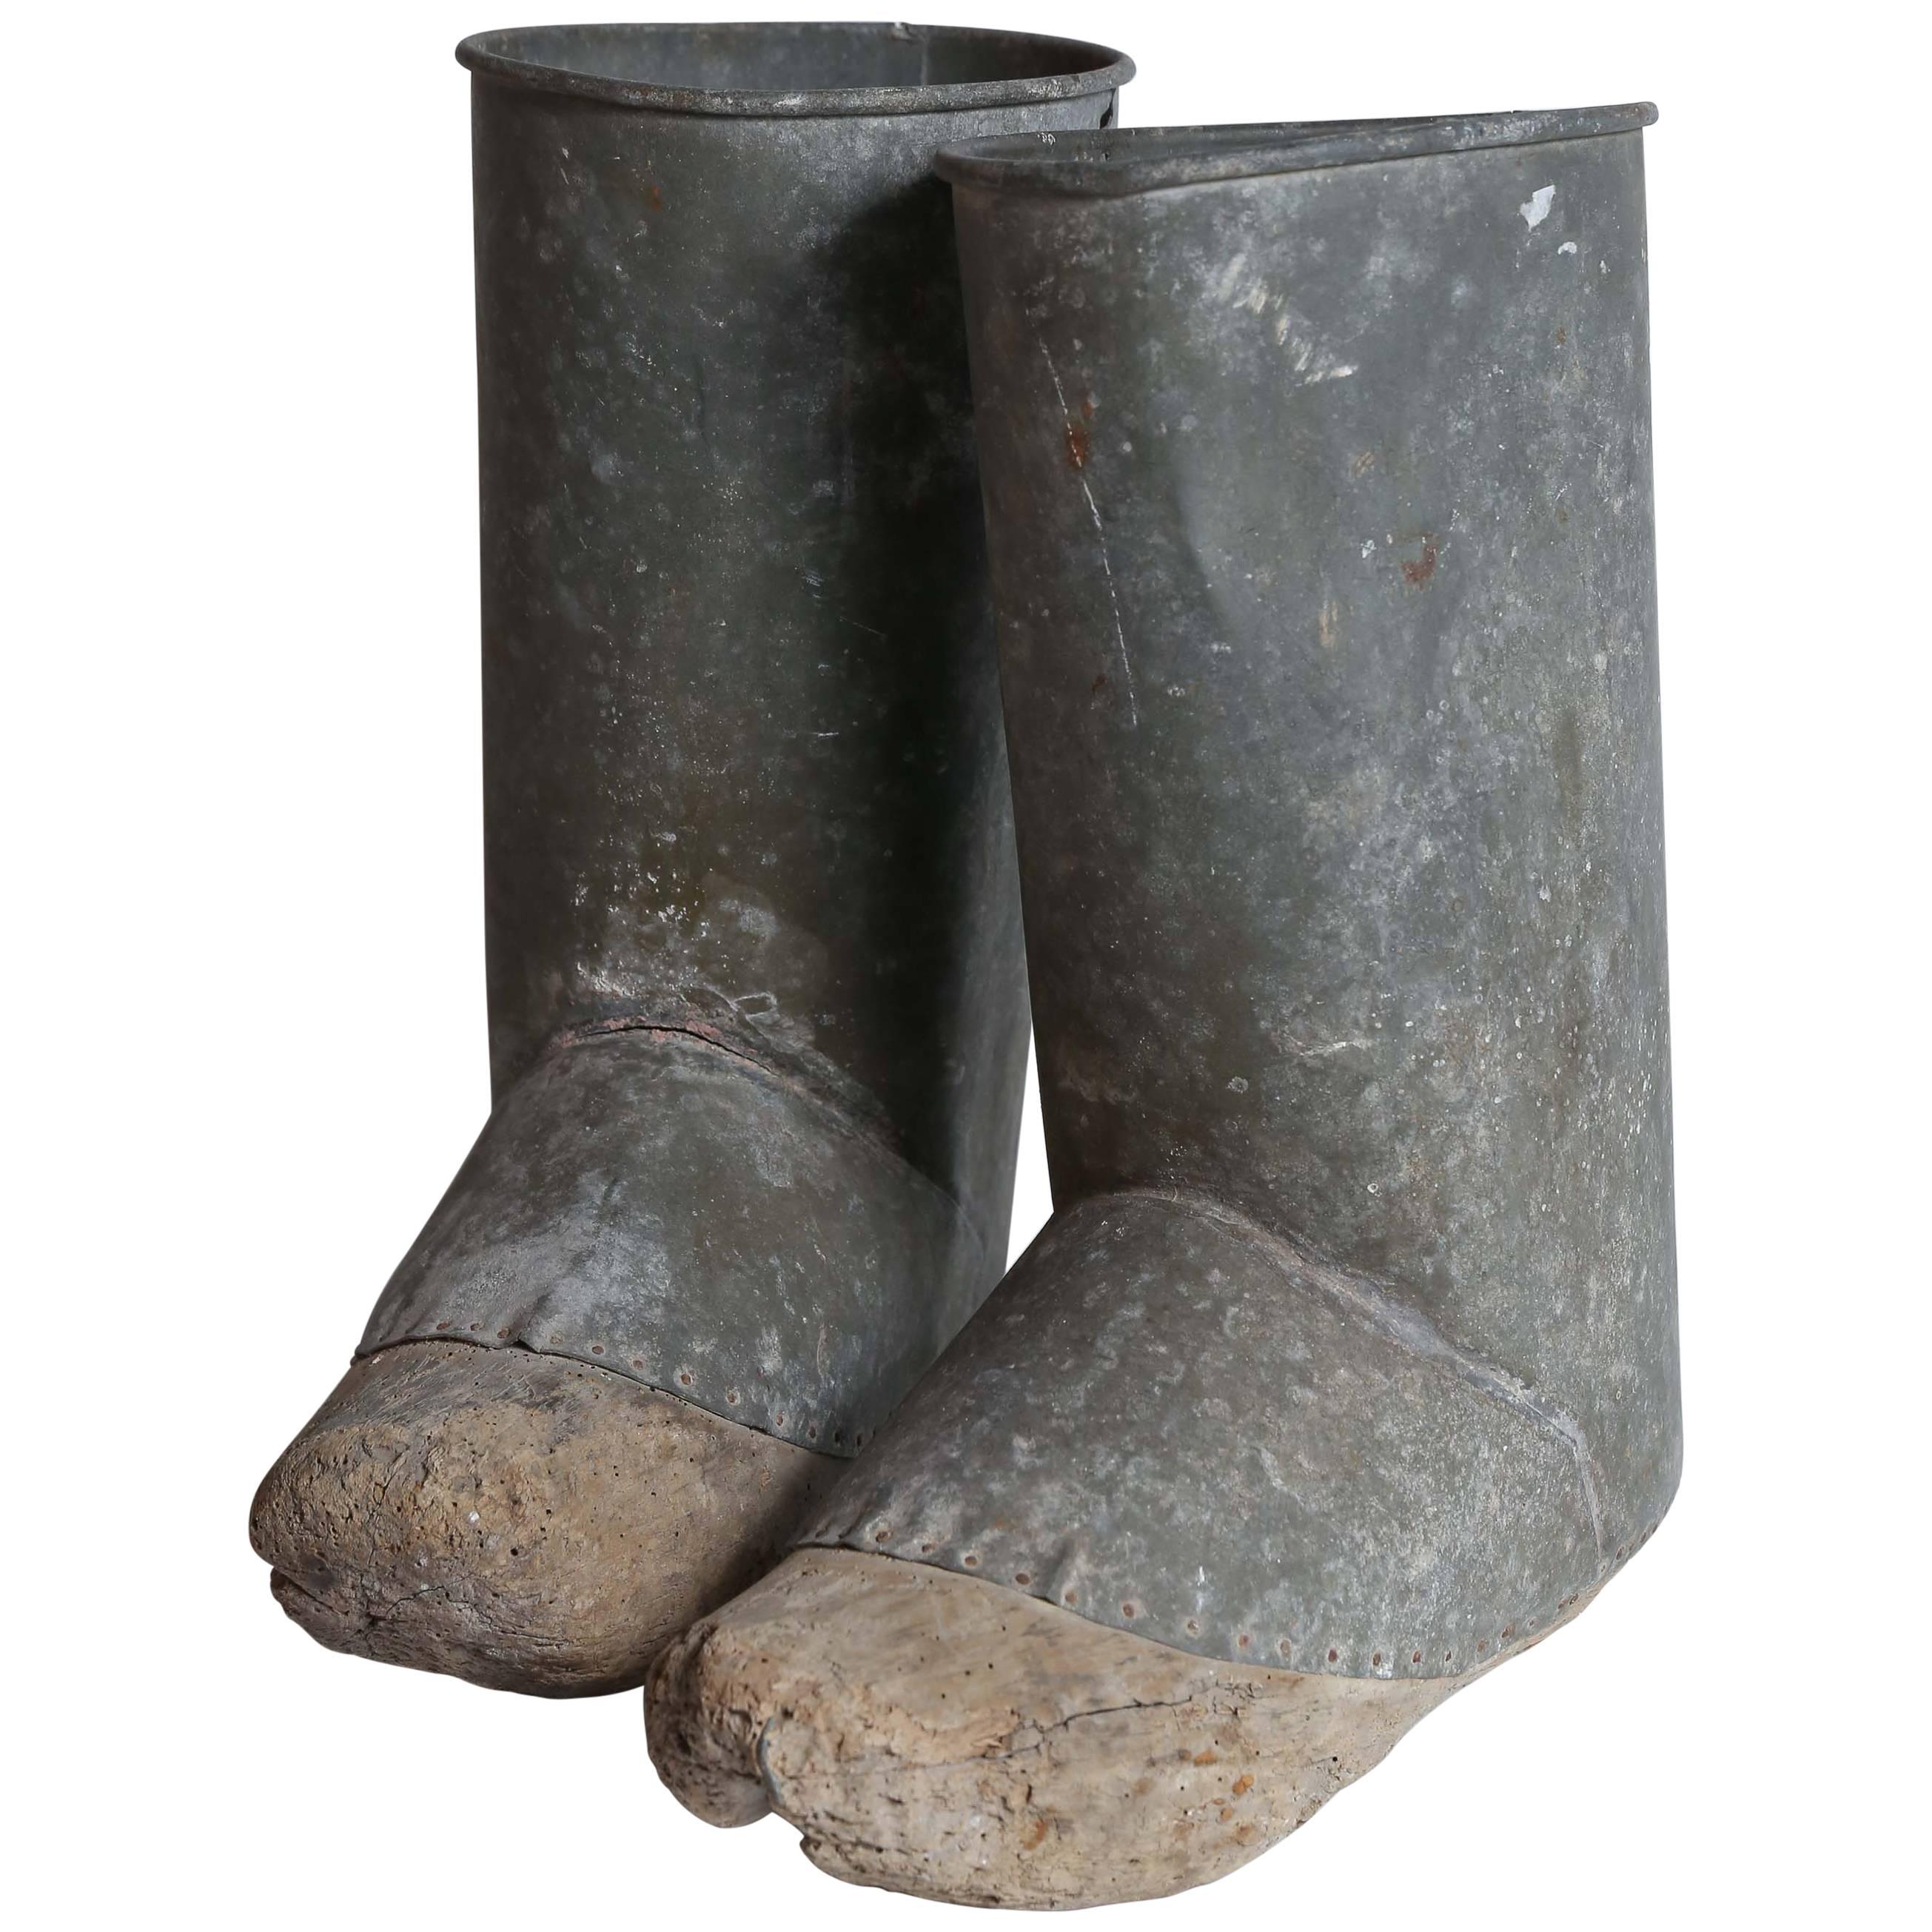 Pair of 19th Century Zinc and Wood Boots